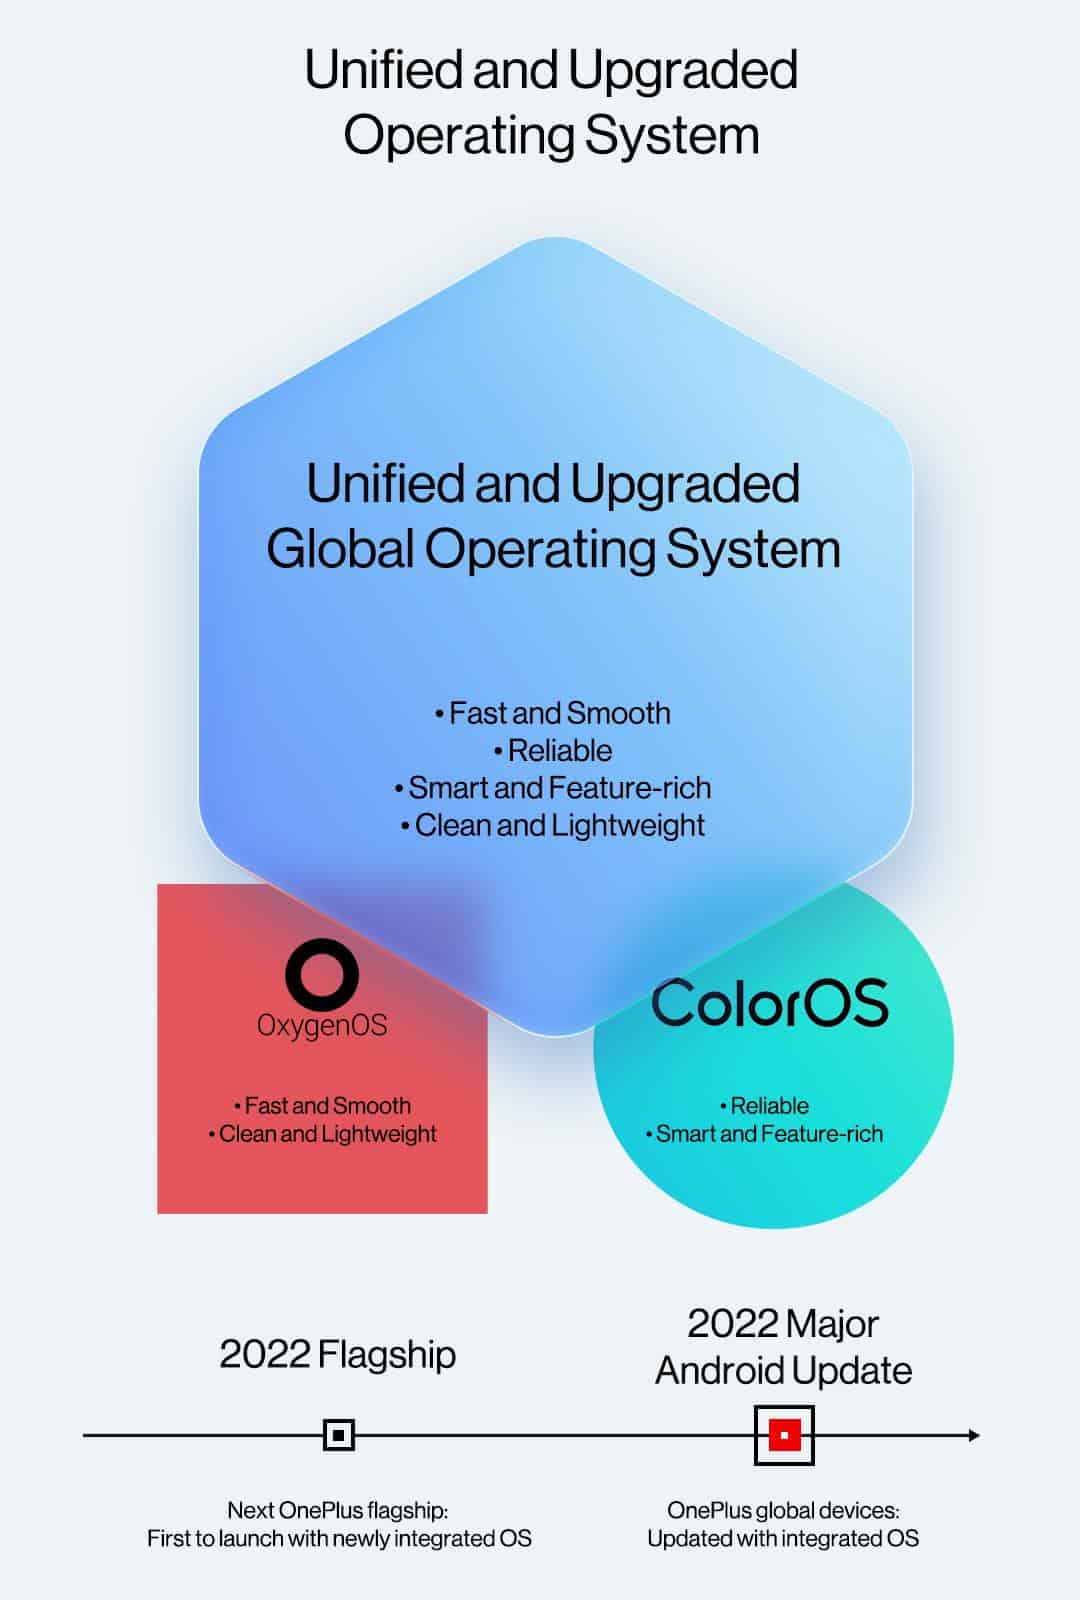 OnePlus will introduce a new OS by integrating OxygenOS with ColorOS